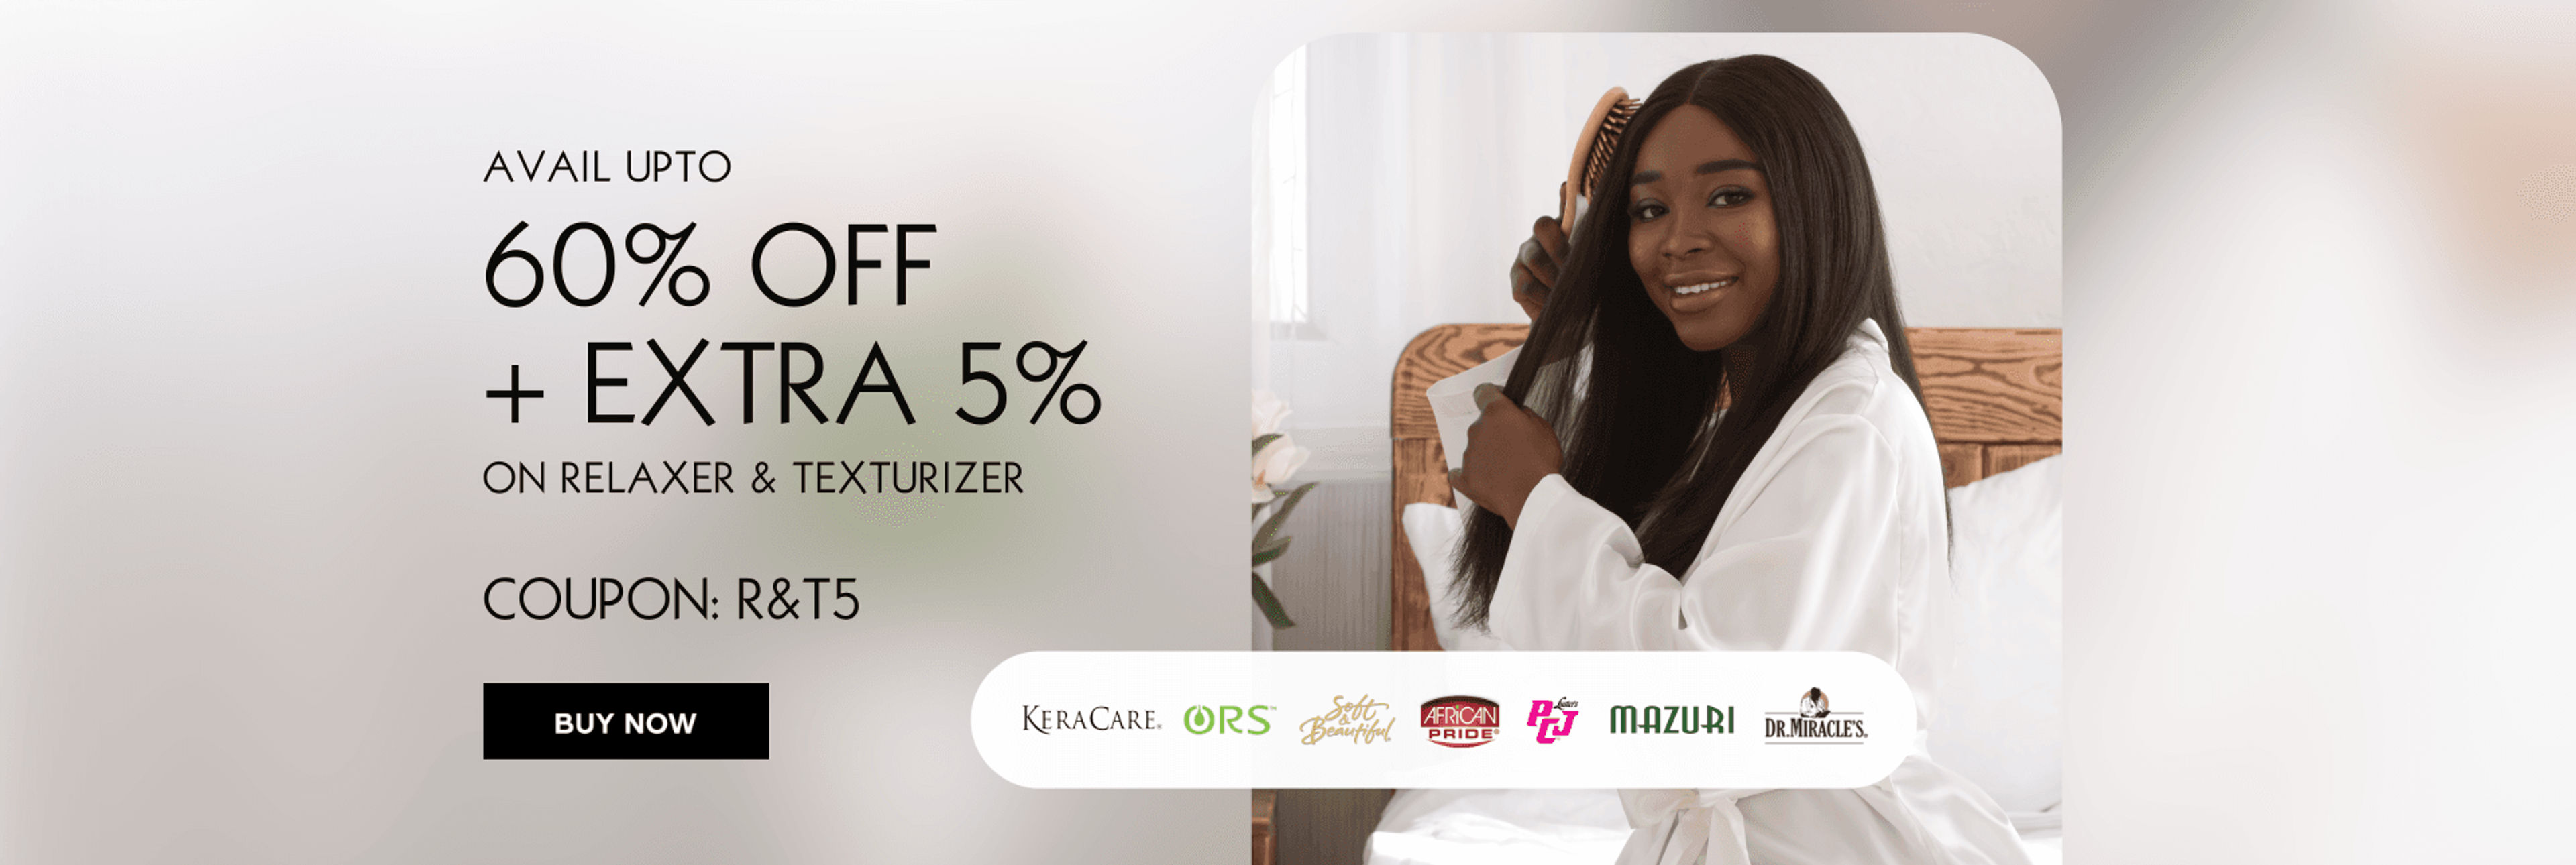 Avail upto 60% off on Relaxer & Texturizer + EXTRA 5% using below code